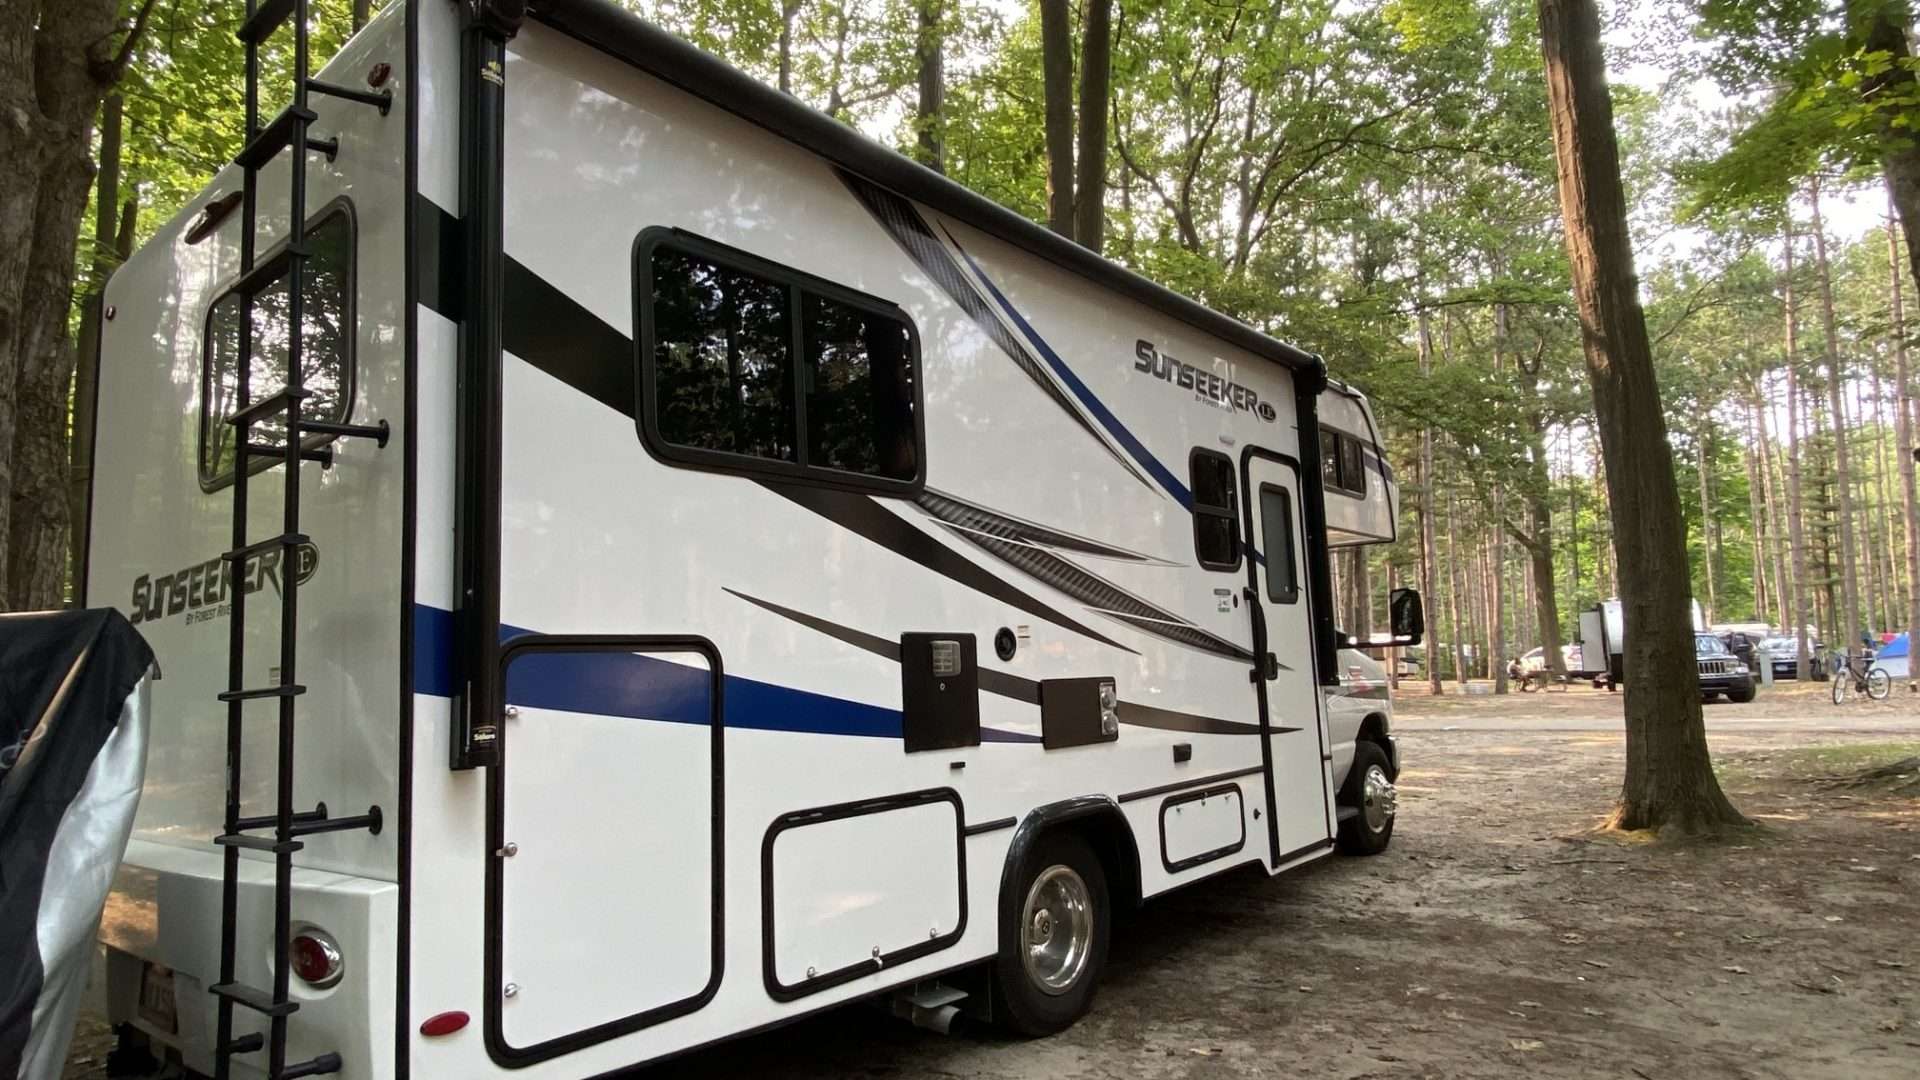 RV parked at campsite in Traverse City.